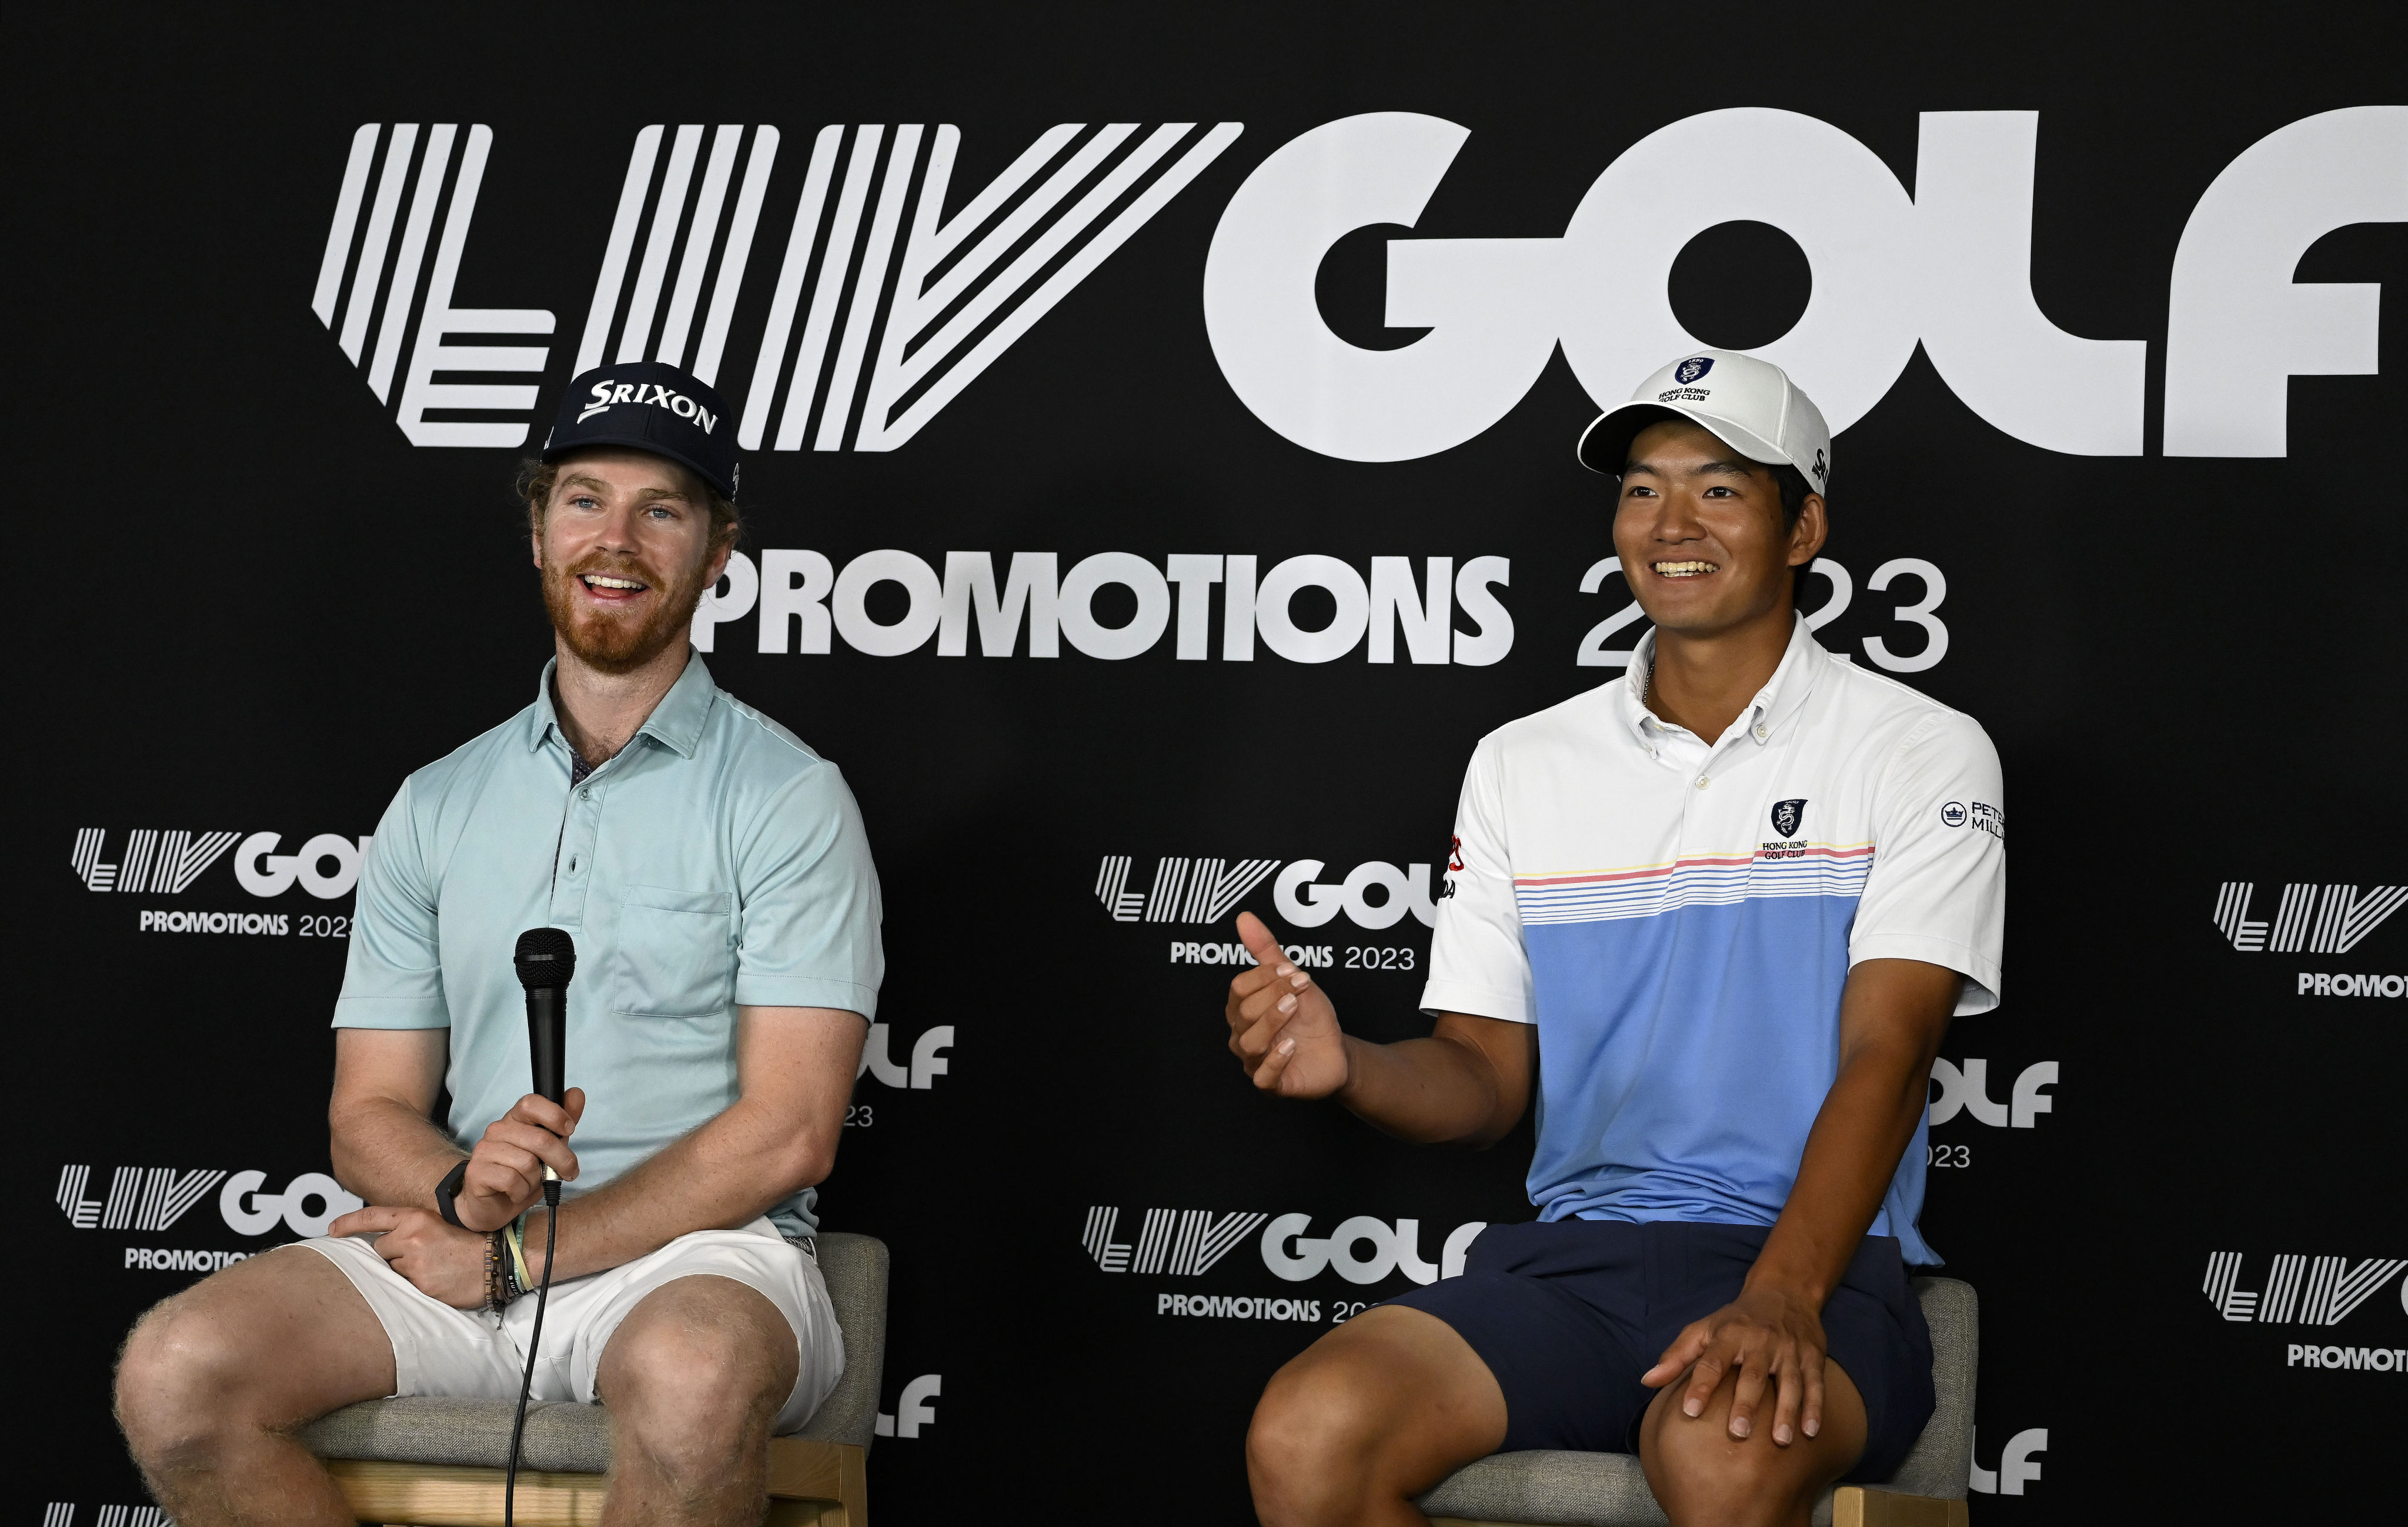 Kieran Vincent of Zimbabwe and Hong Kong’s Taichi Kho answer questions at a press conference ahead of the LIV Golf Promotions event at the Abu Dhabi Golf Club. Photo: Asian Tour.